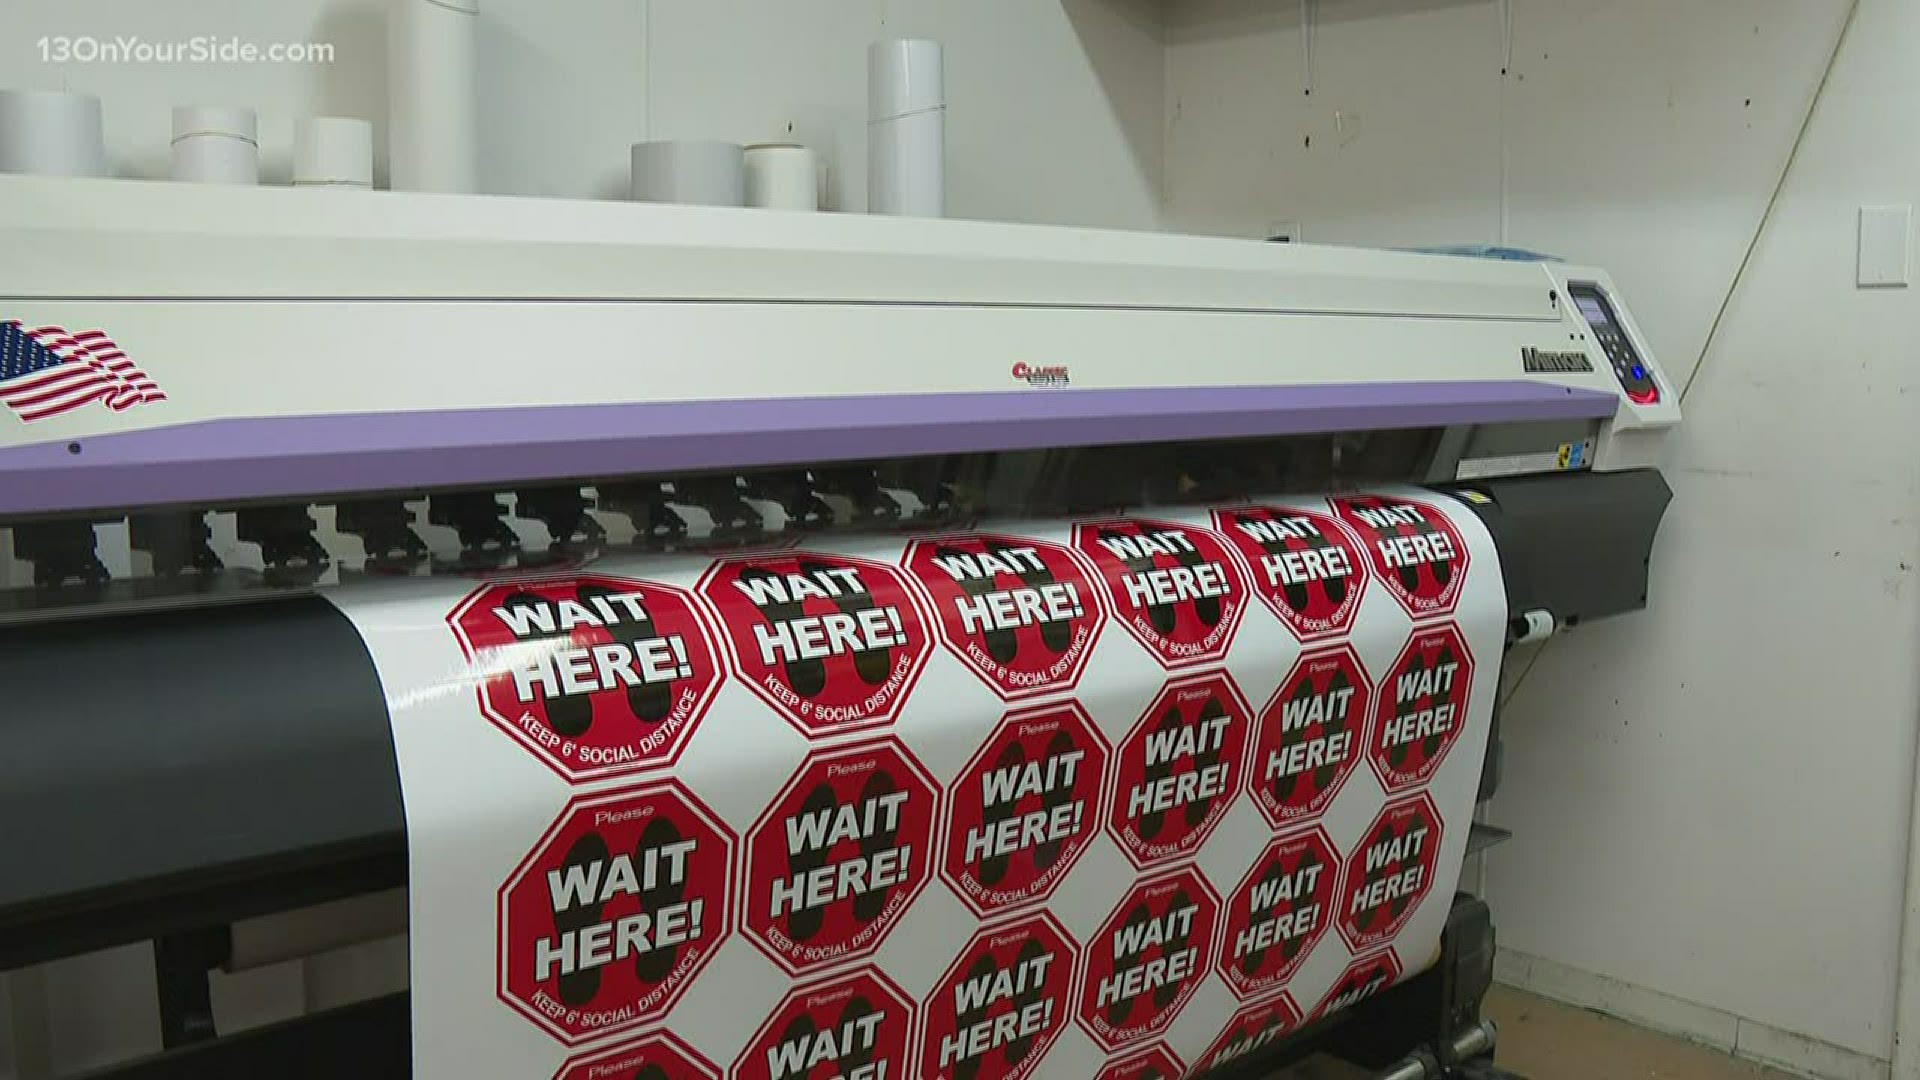 As Michigan prepares to re-open for business amid the COVID-19 pandemic, a Muskegon company is creating important signage that's gaining interest nationwide.